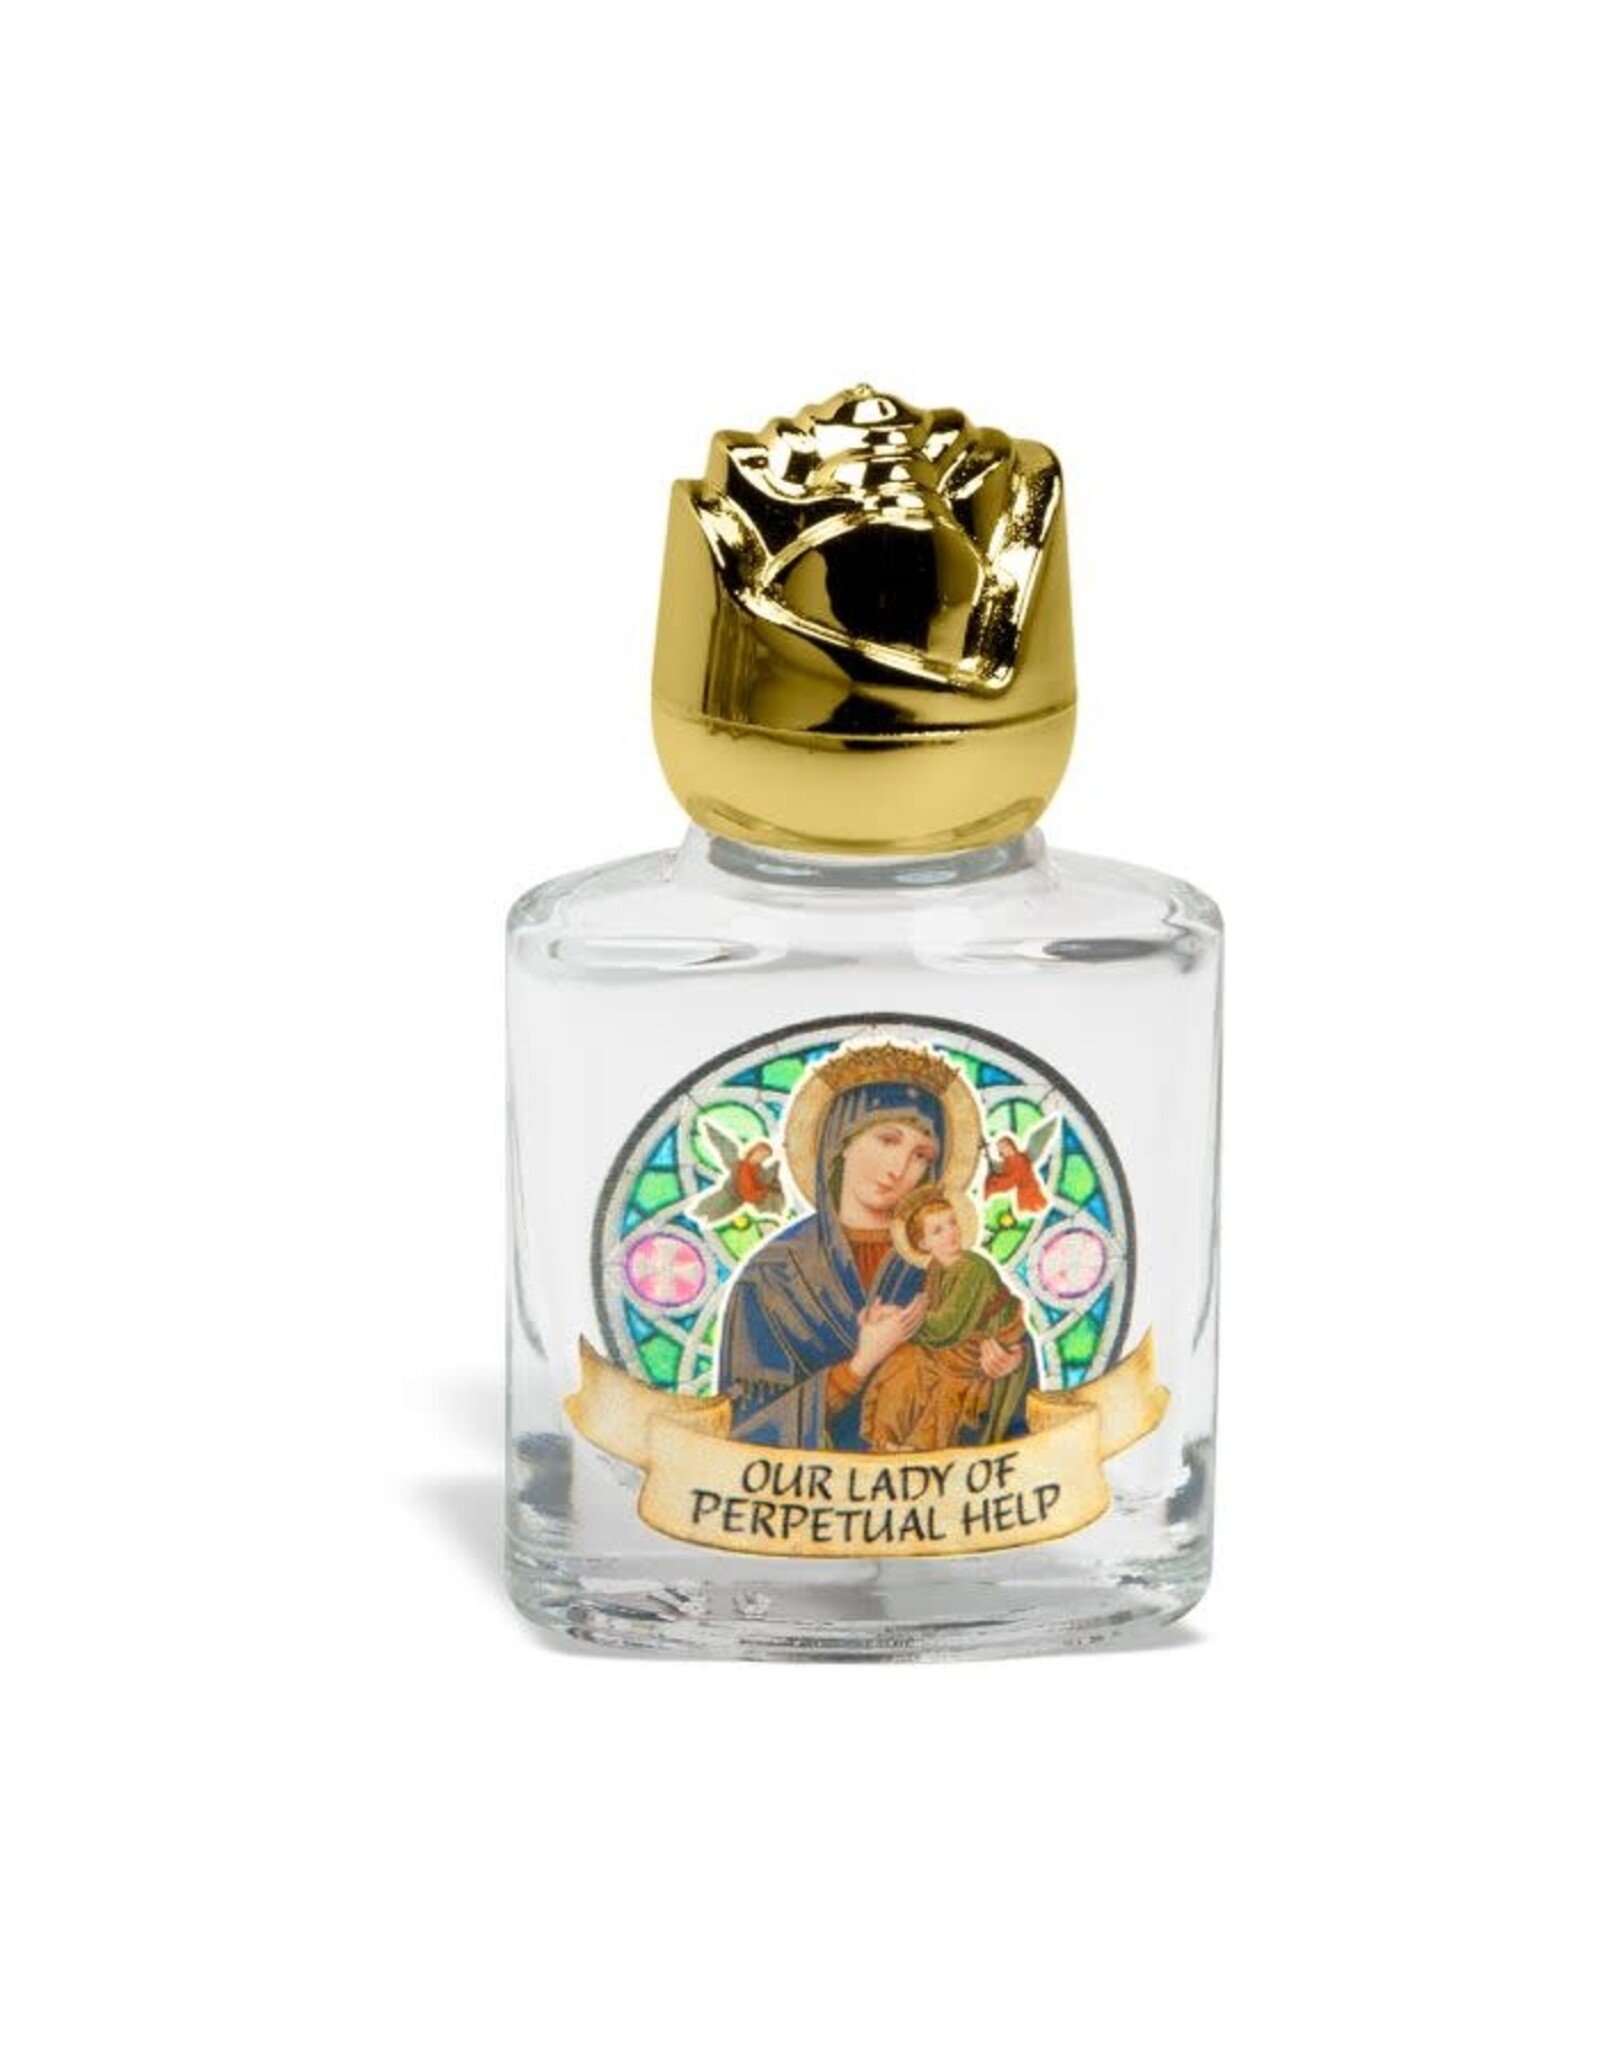 Hirten Holy Water Bottle - Our Lady of Perpetual Help